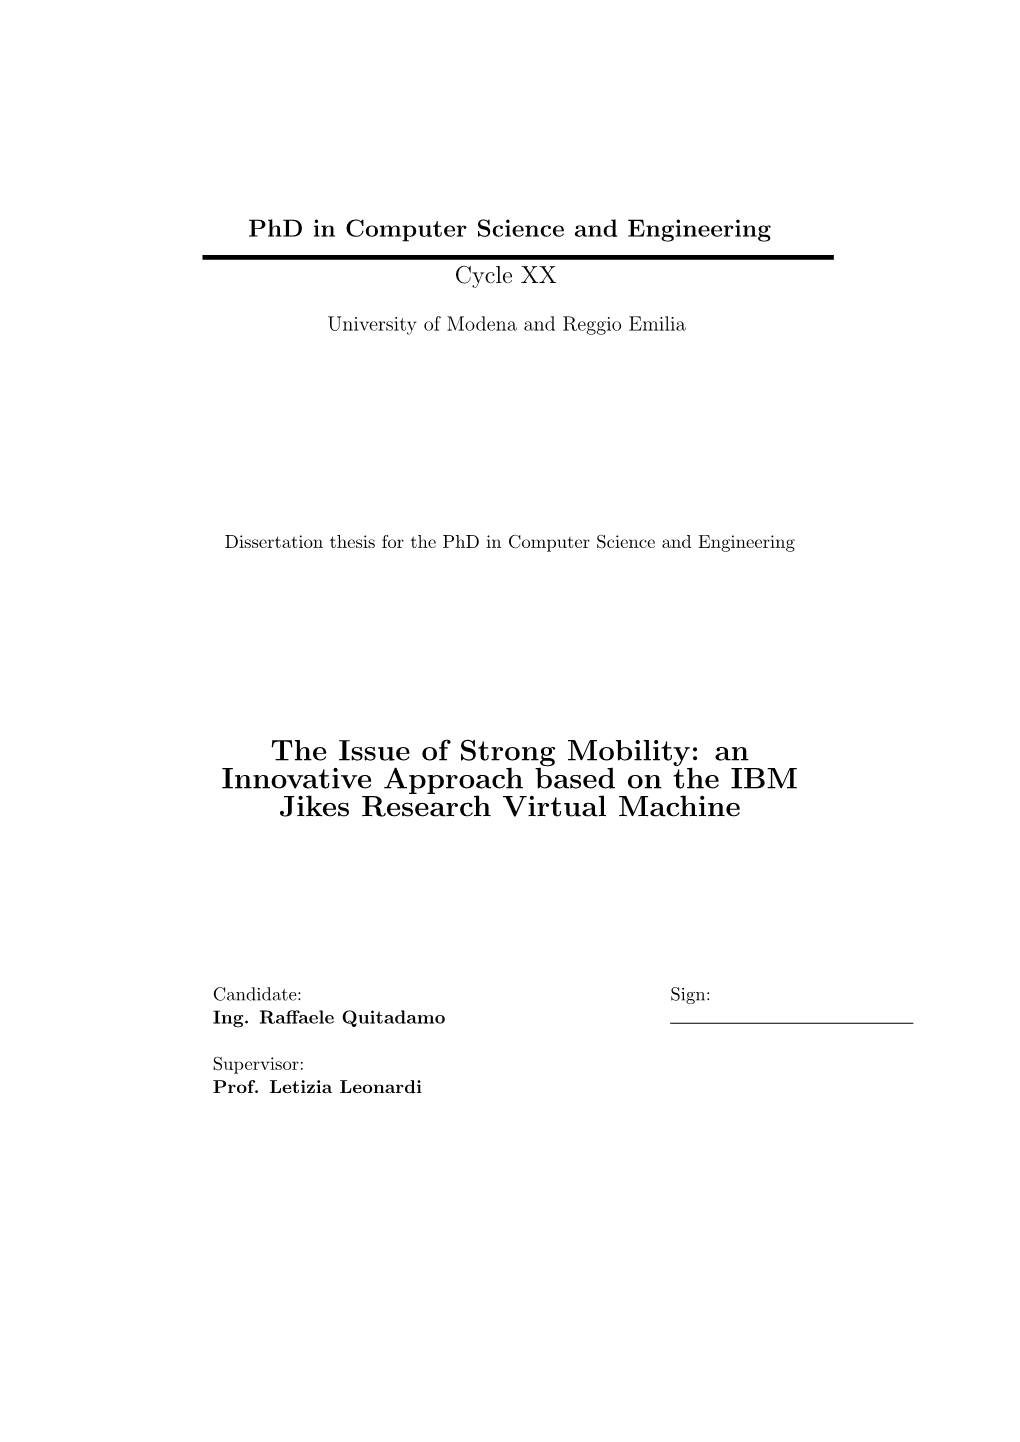 The Issue of Strong Mobility: an Innovative Approach Based on the IBM Jikes Research Virtual Machine